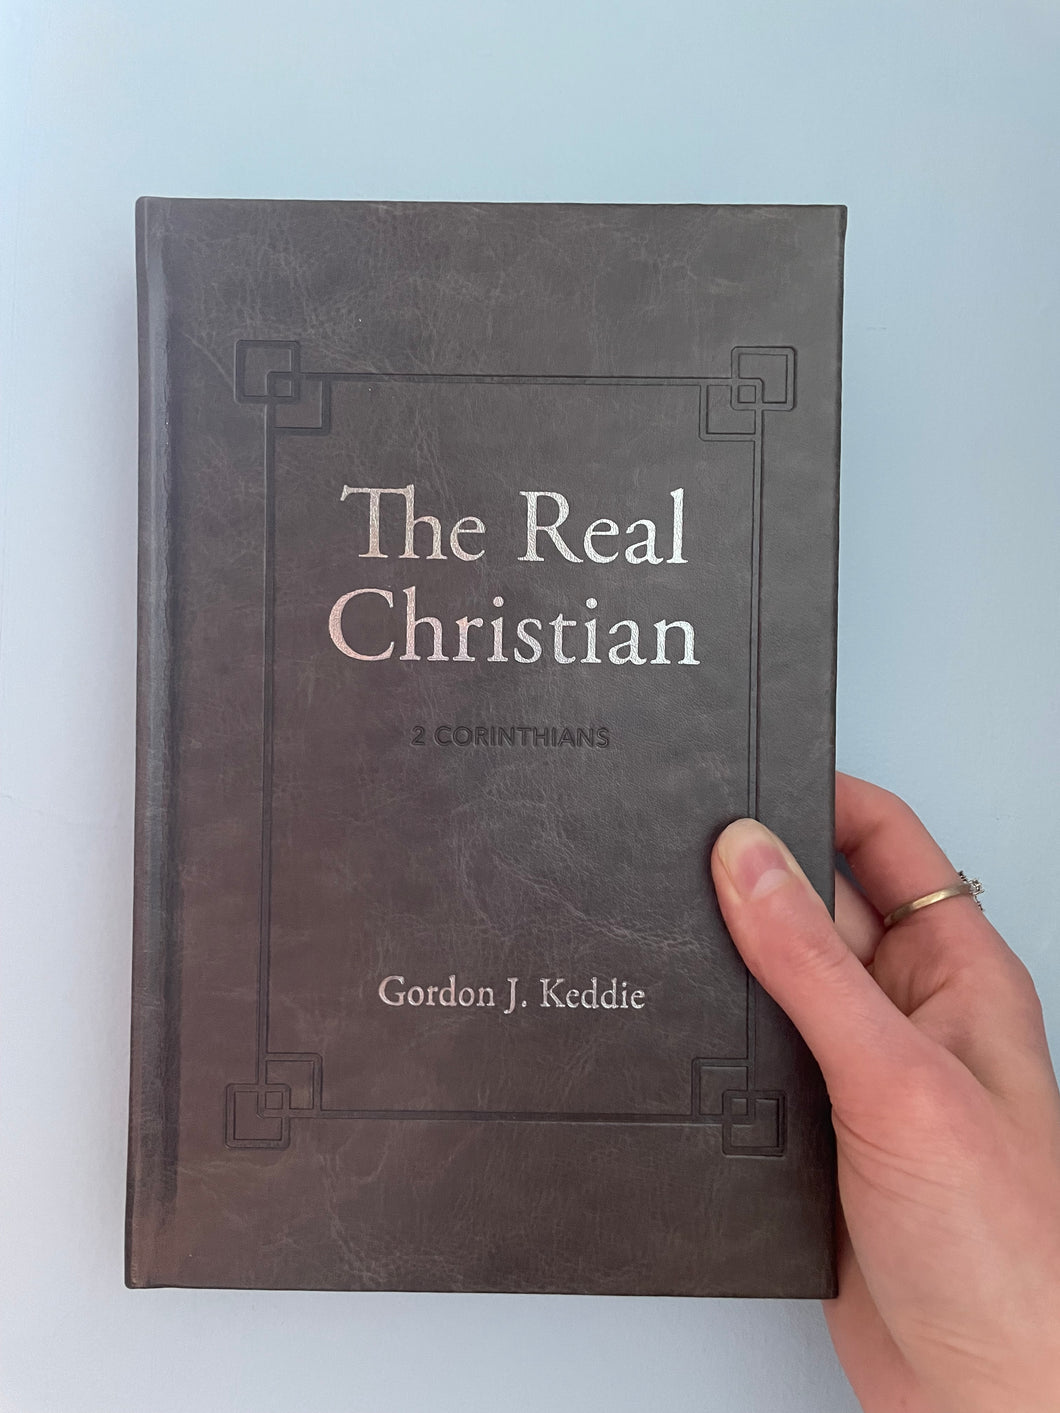 The Real Christian: A Commentary on 2 Corinthians